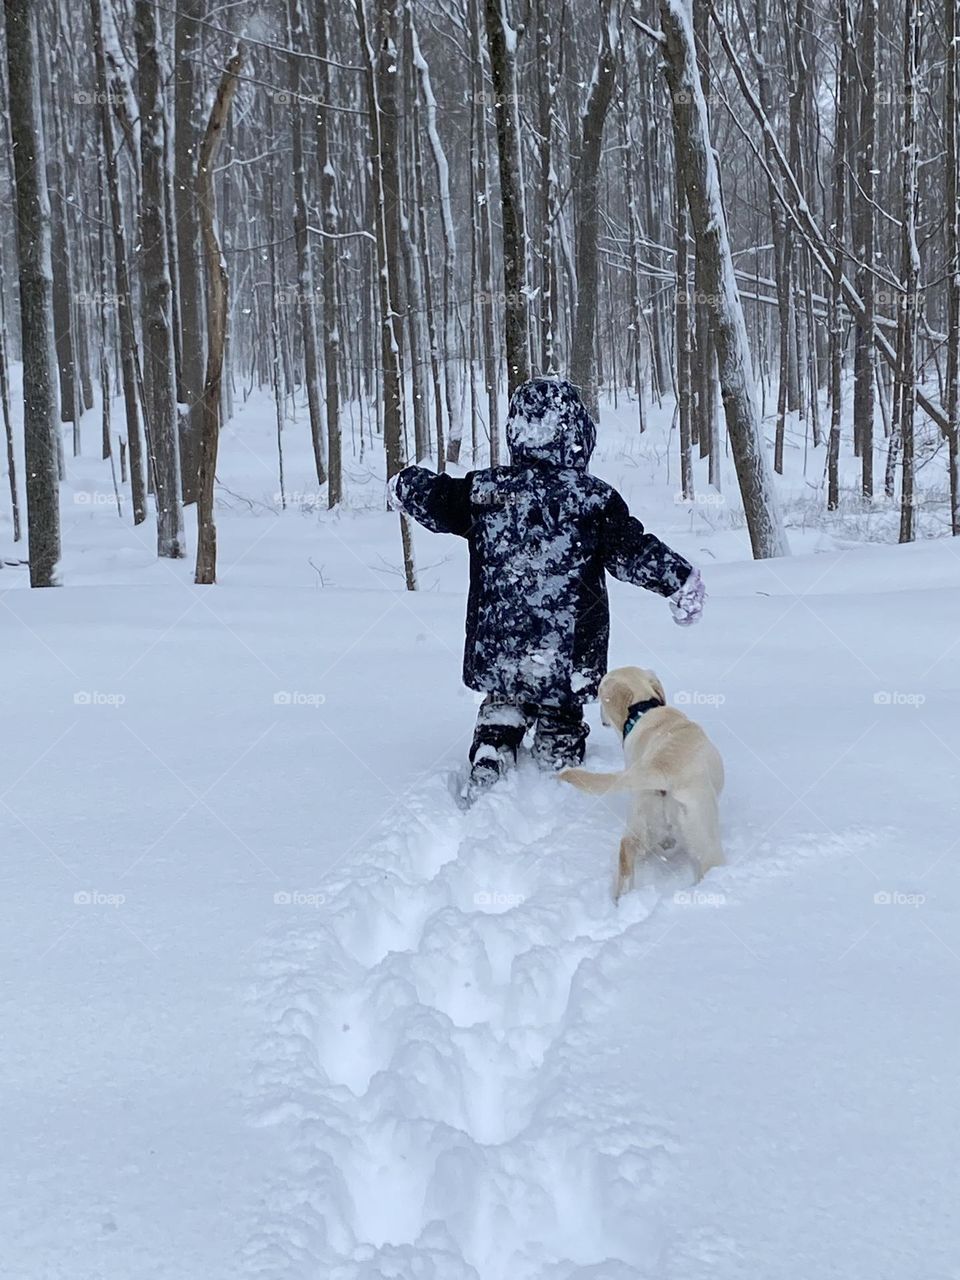 A young boy in snowy clothes from the back running through deep snow followed by his Labrador retriever puppy. 